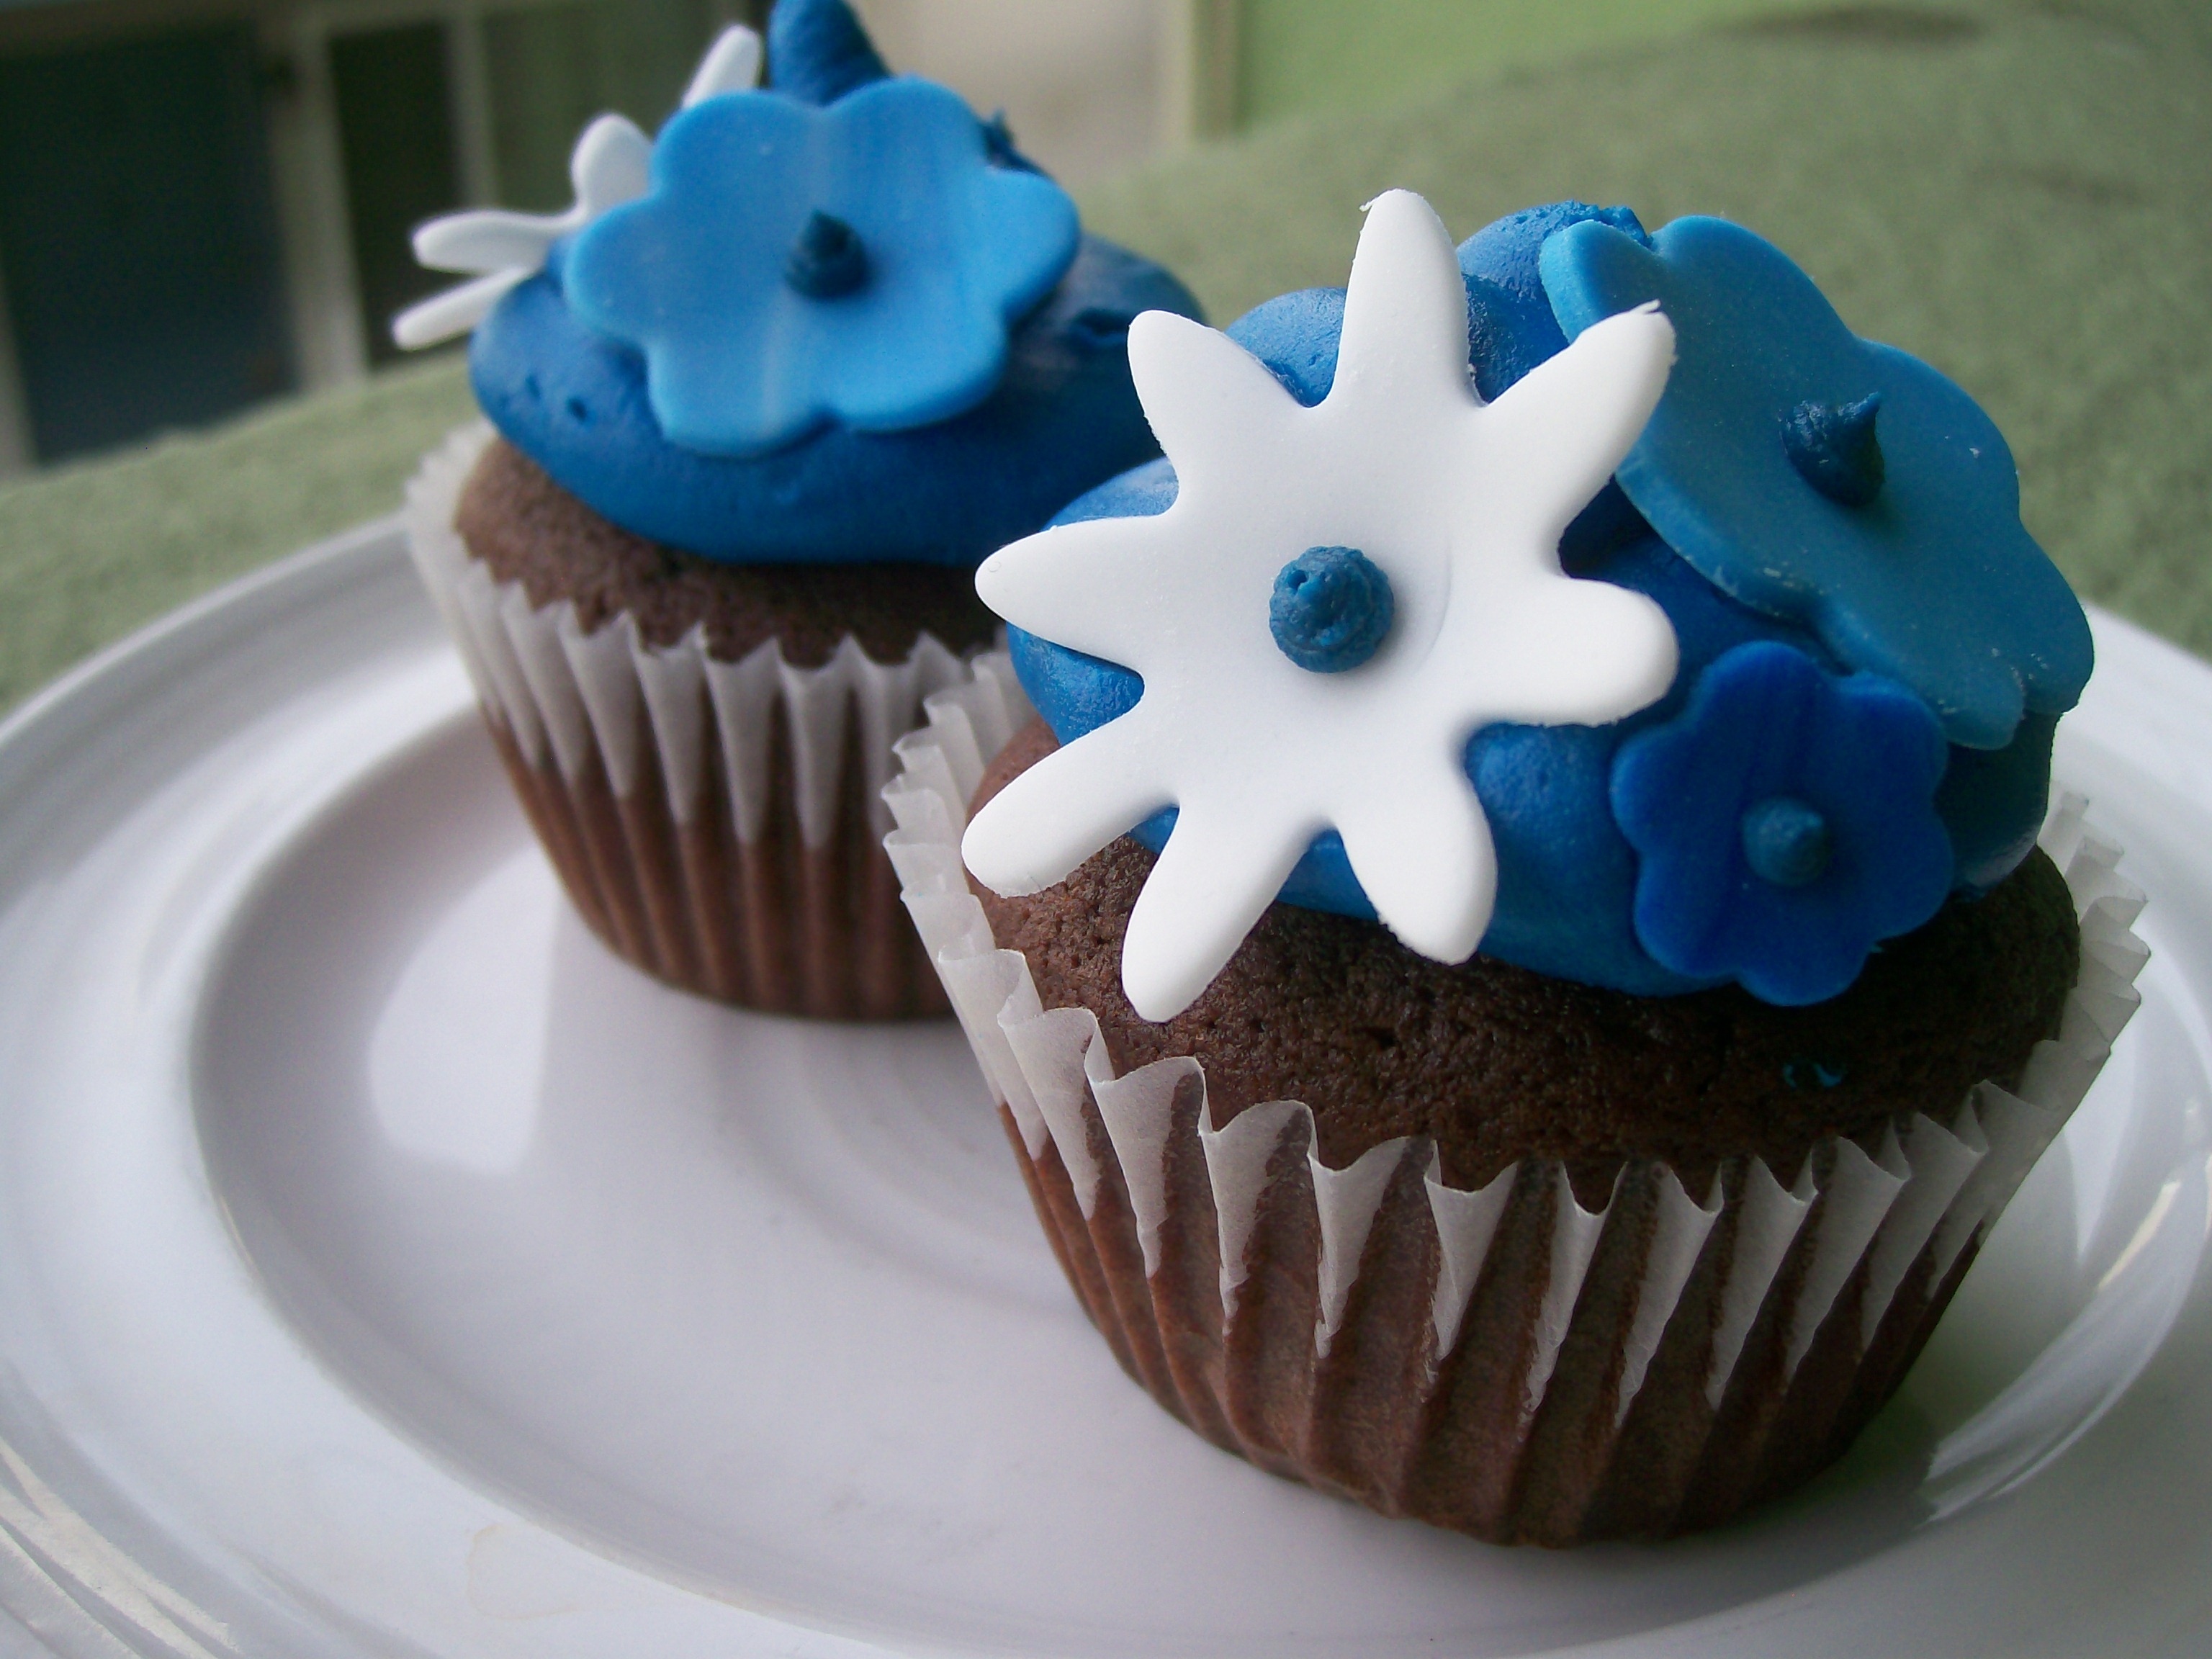 Blue Cupcakes with Cake Flowers